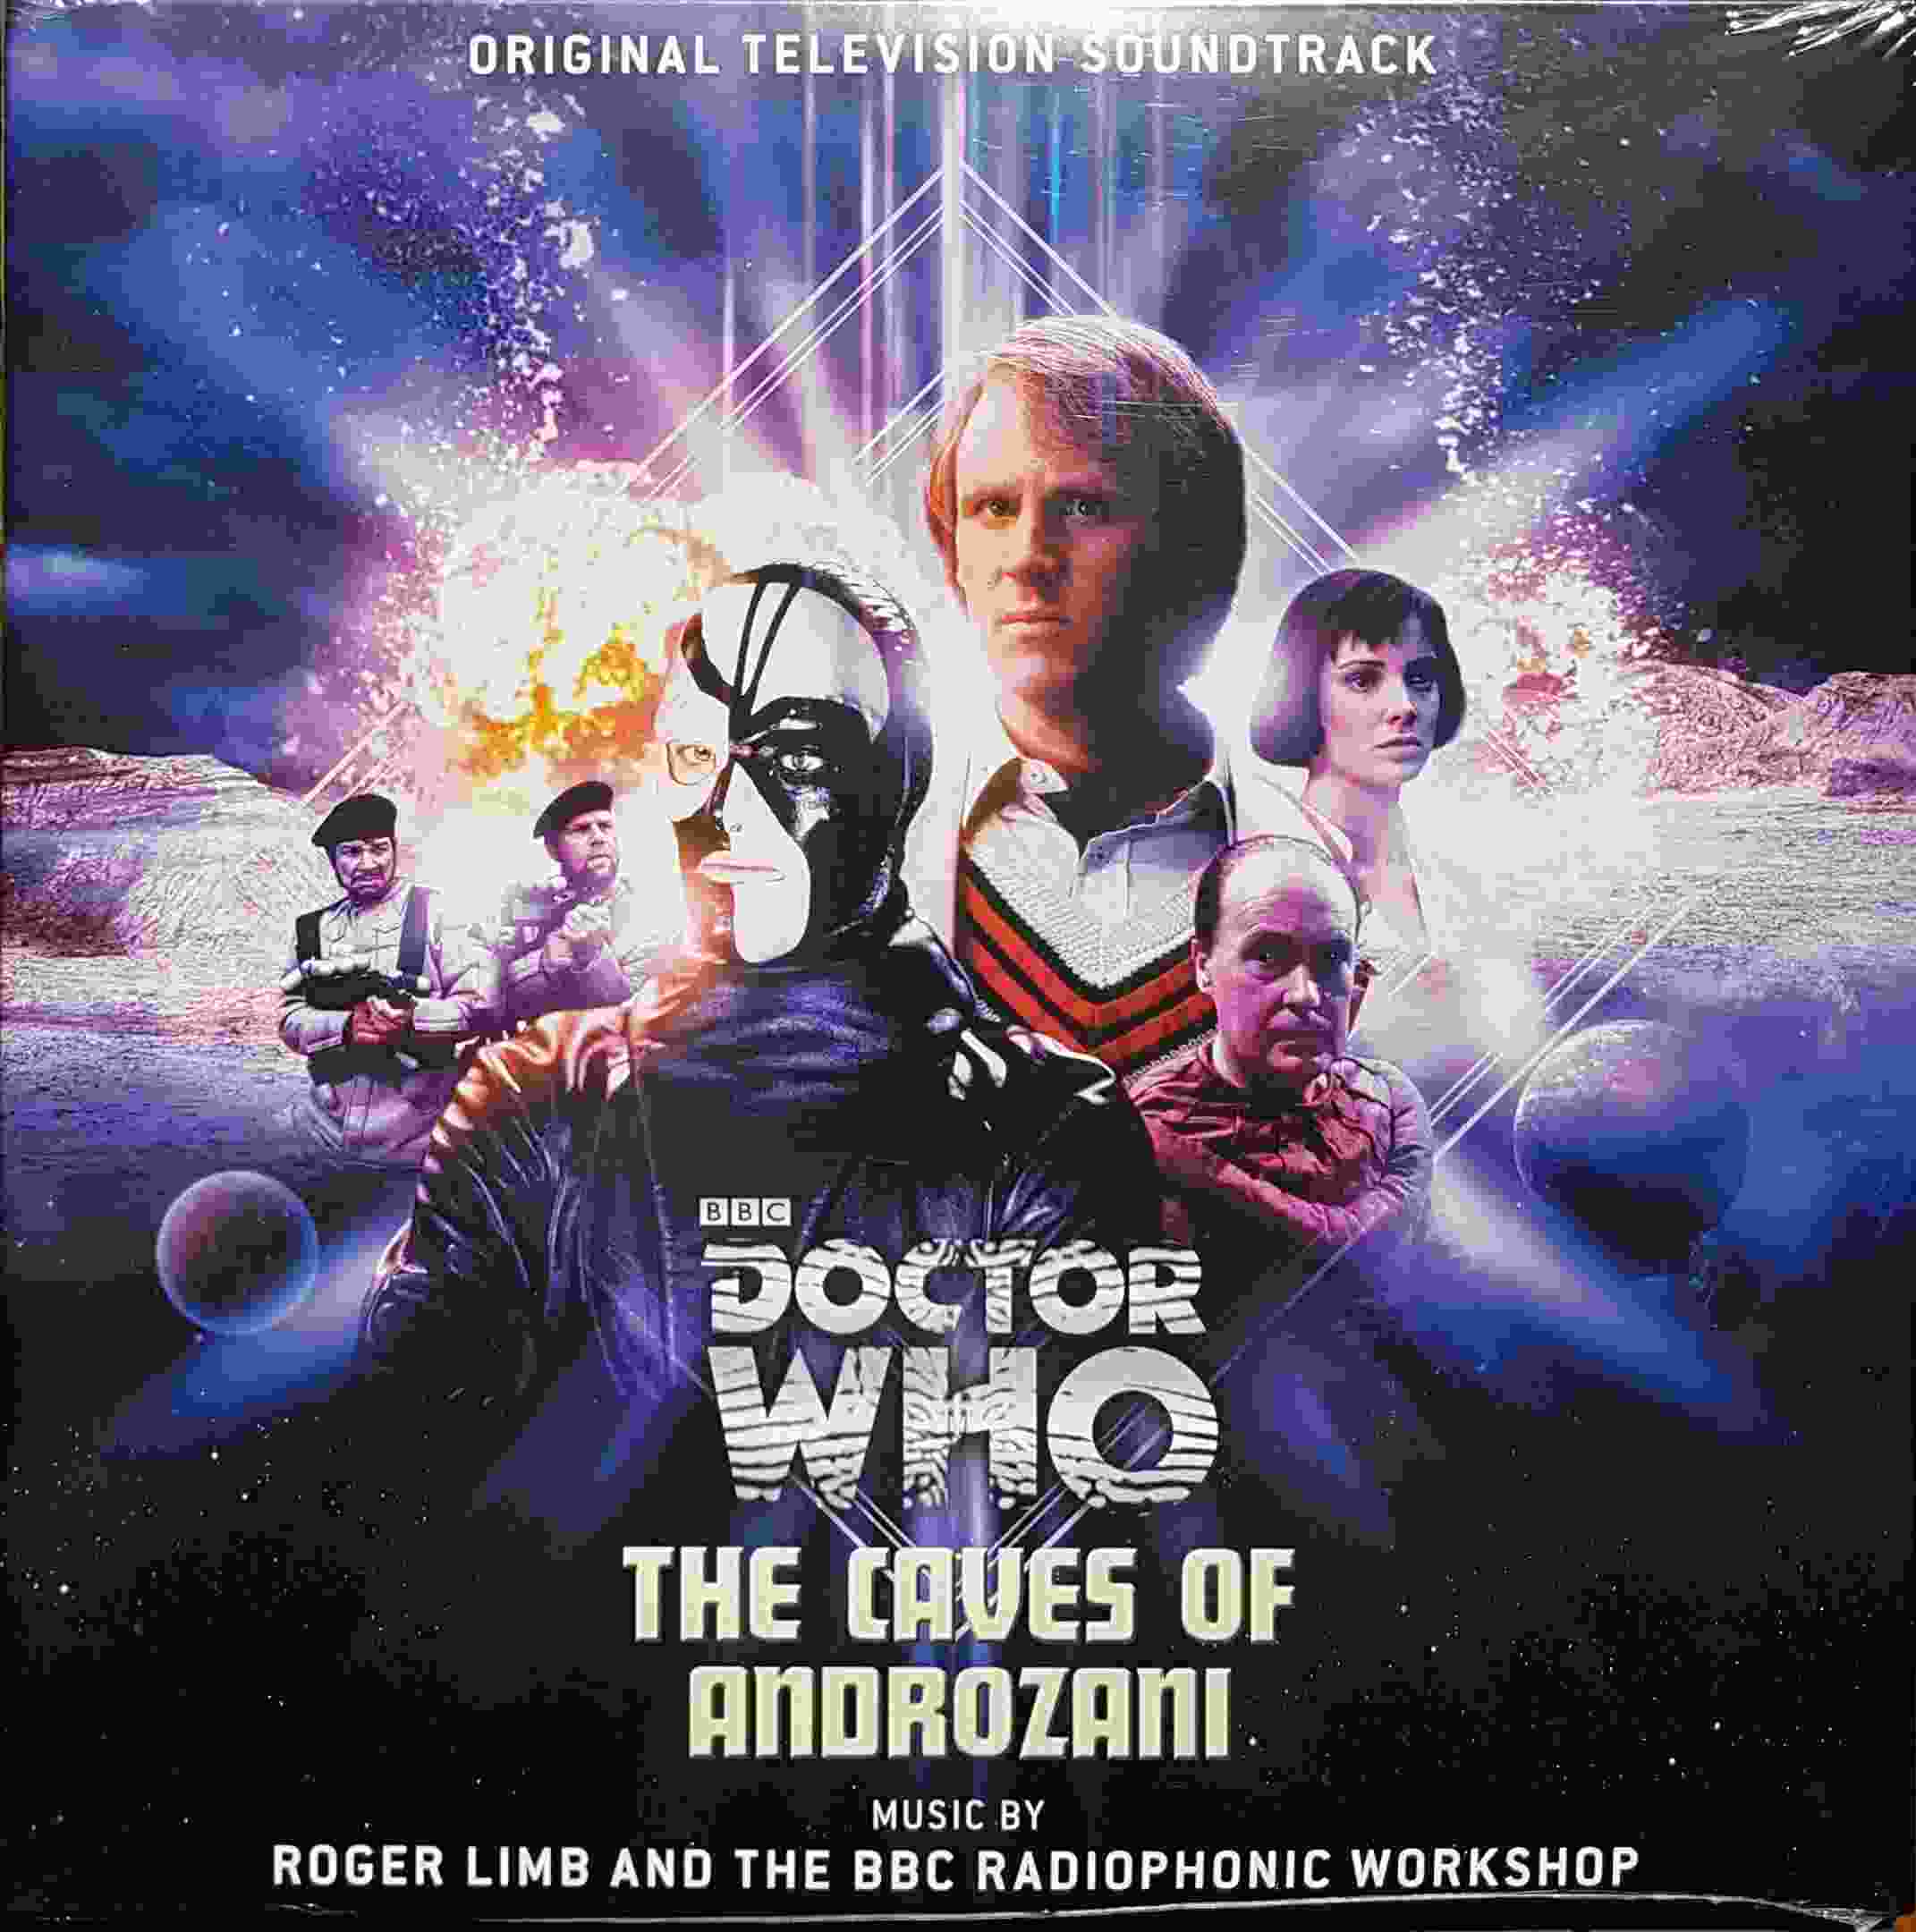 Picture of SILLP 1370 Doctor Who - The caves of Androzani by artist Roger Limb / BBC Radiophonic Workshop from the BBC albums - Records and Tapes library